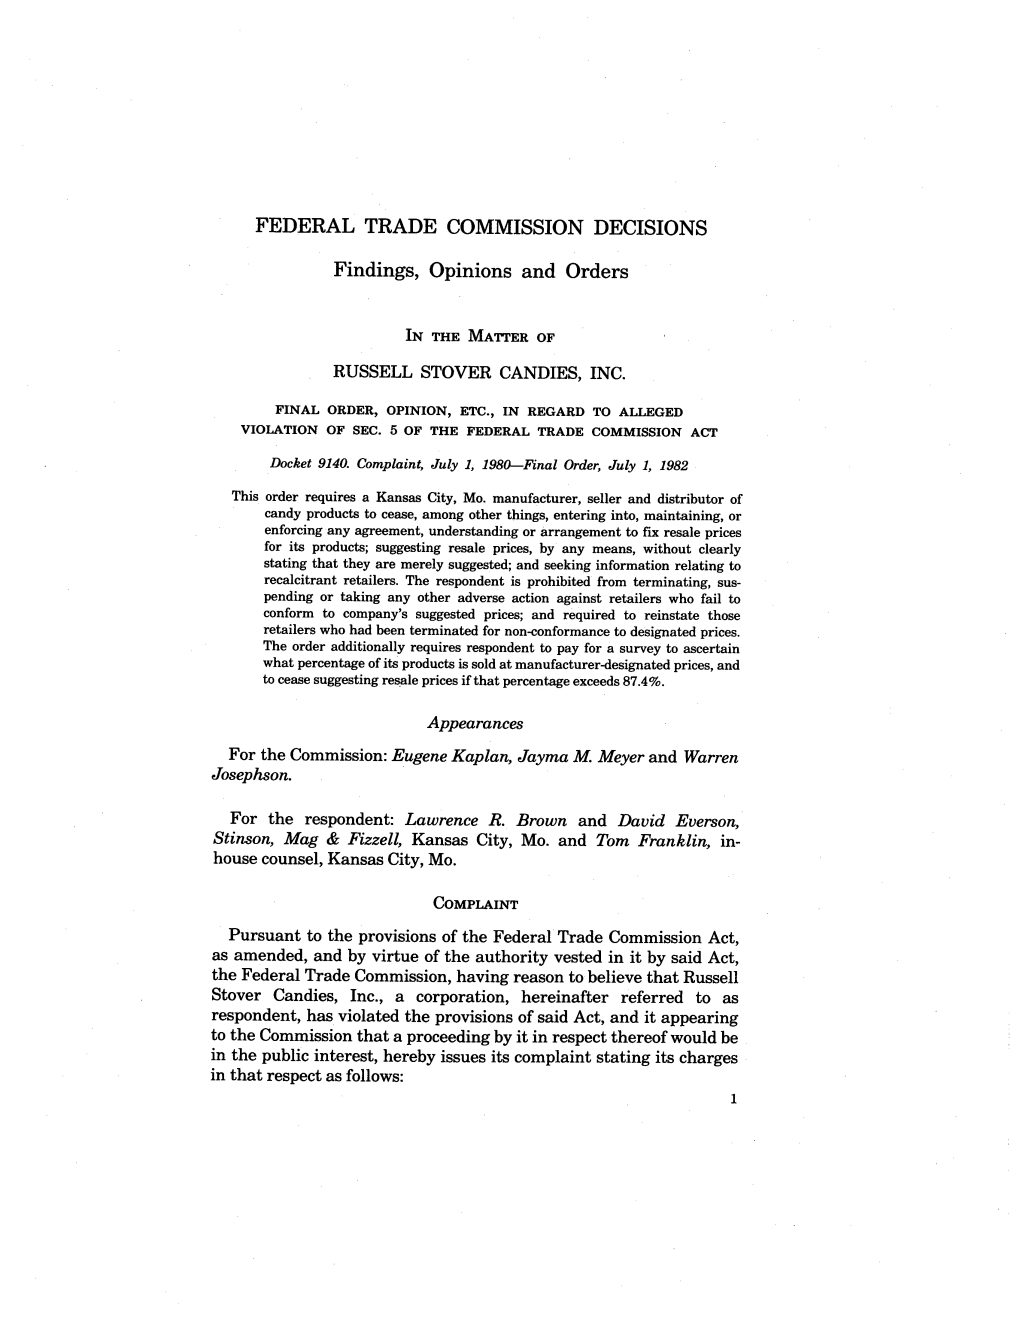 Federal Trade Commission Volume Decision